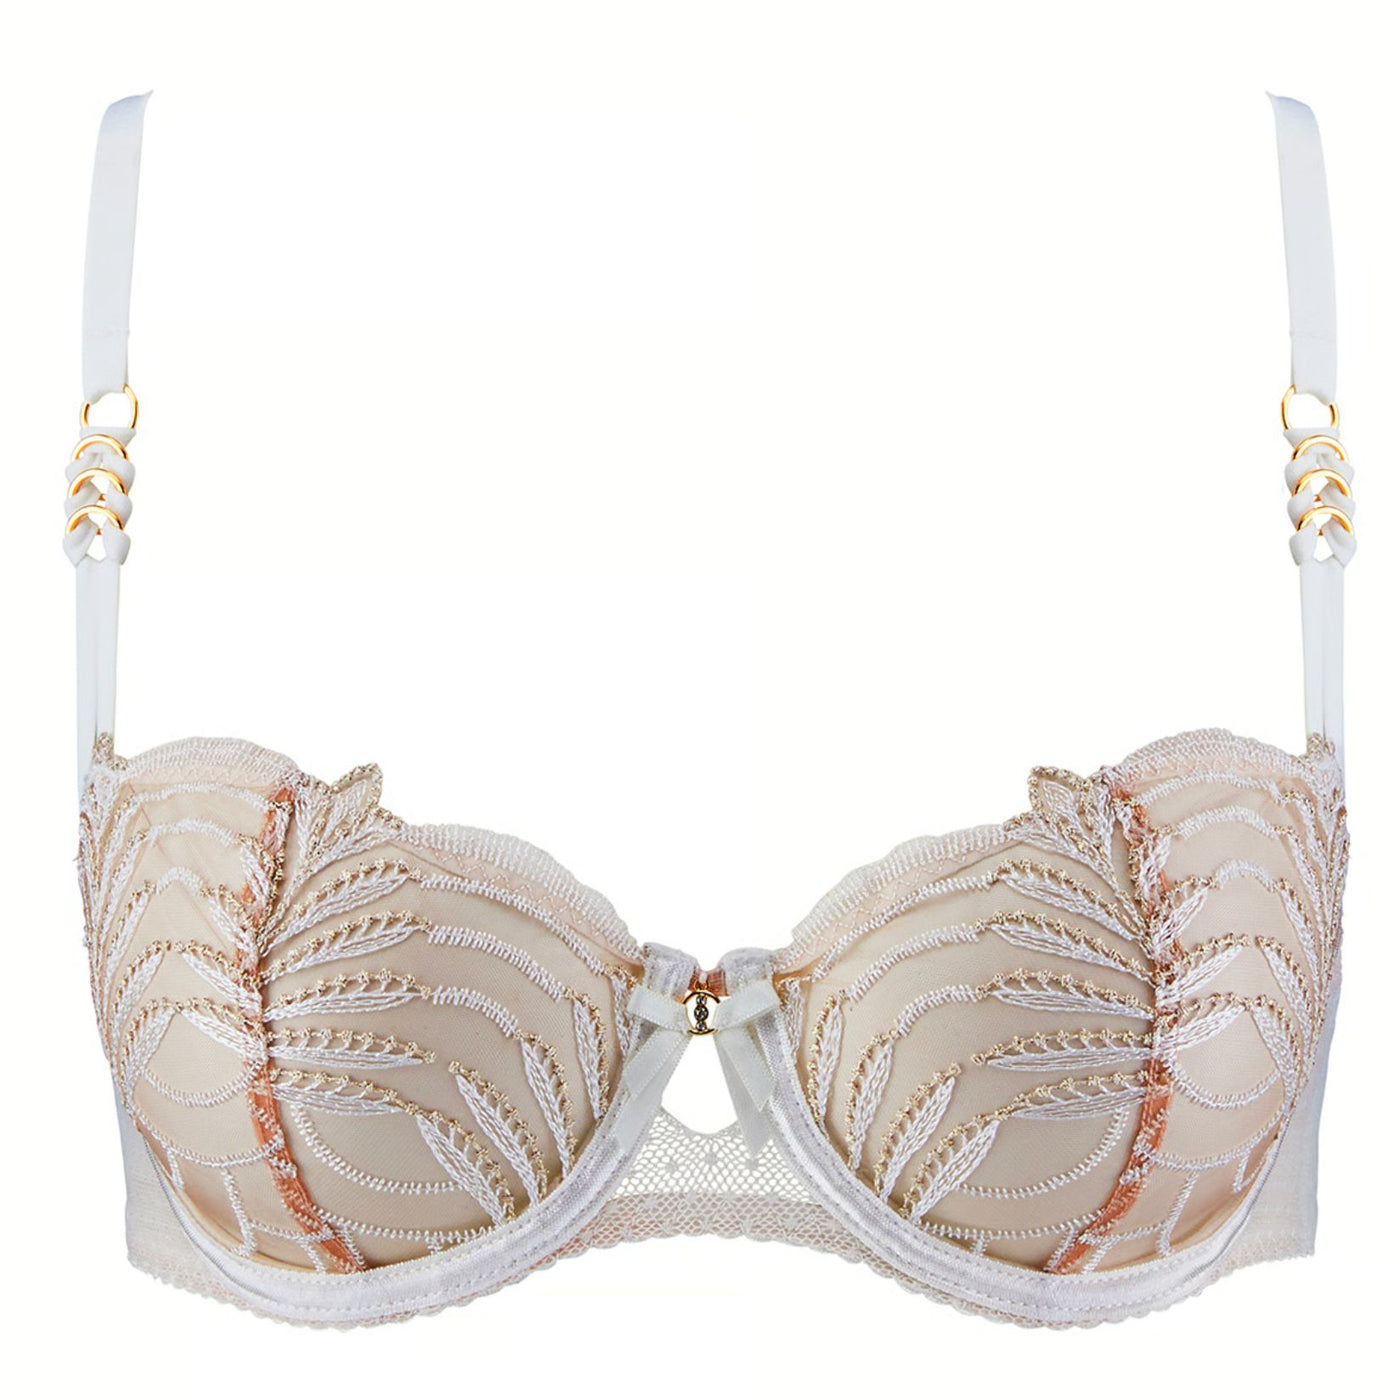 Aubade Hypnolove Half Cup Bra in Gold Feather LDF14-Bras-Aubade-Gold Feather-34-F-Anna Bella Fine Lingerie, Reveal Your Most Gorgeous Self!